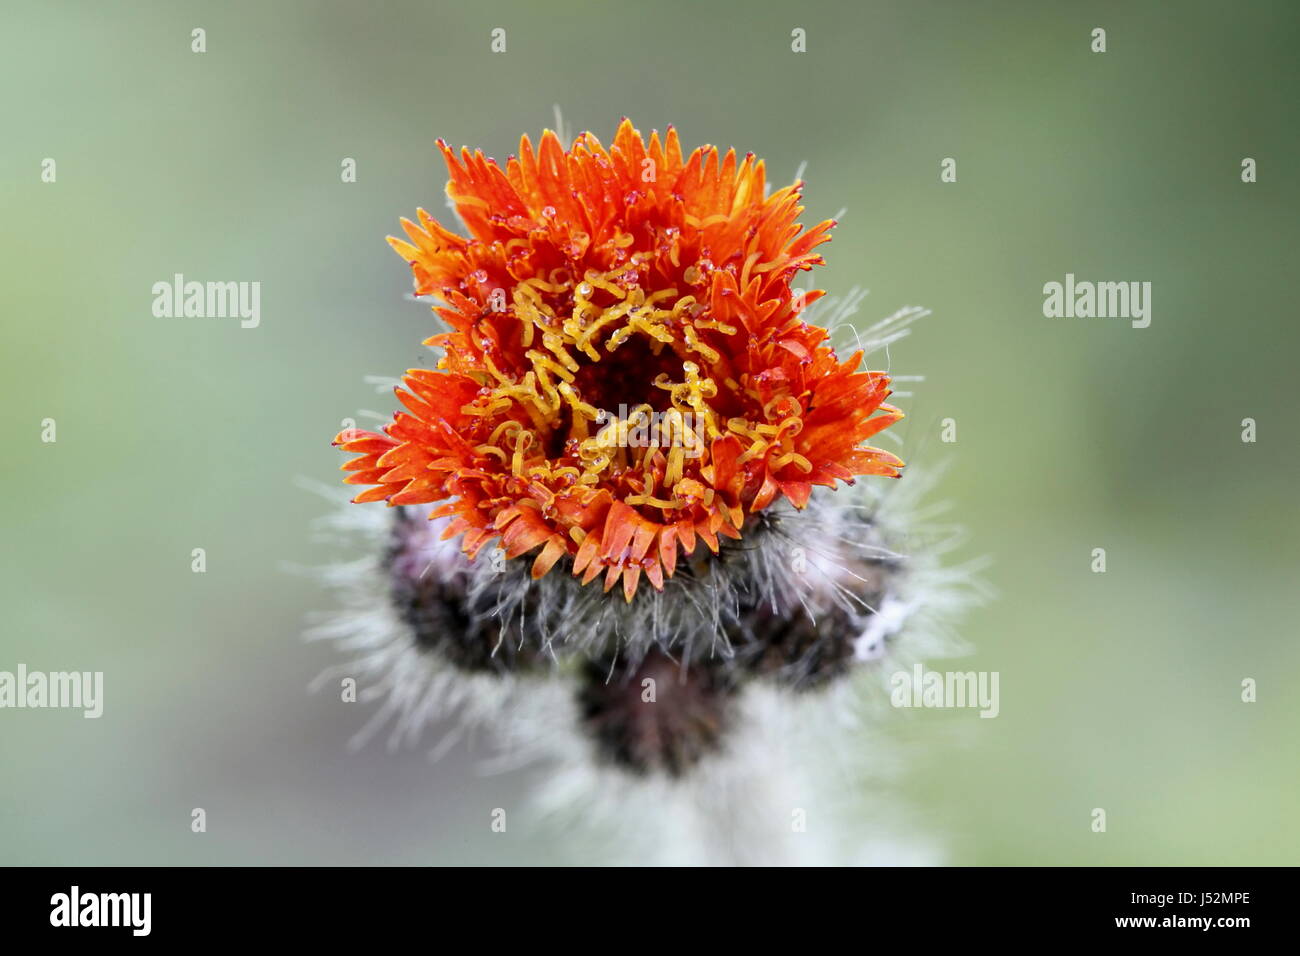 Fox-and-cubs, also known as orange hawkweed Stock Photo